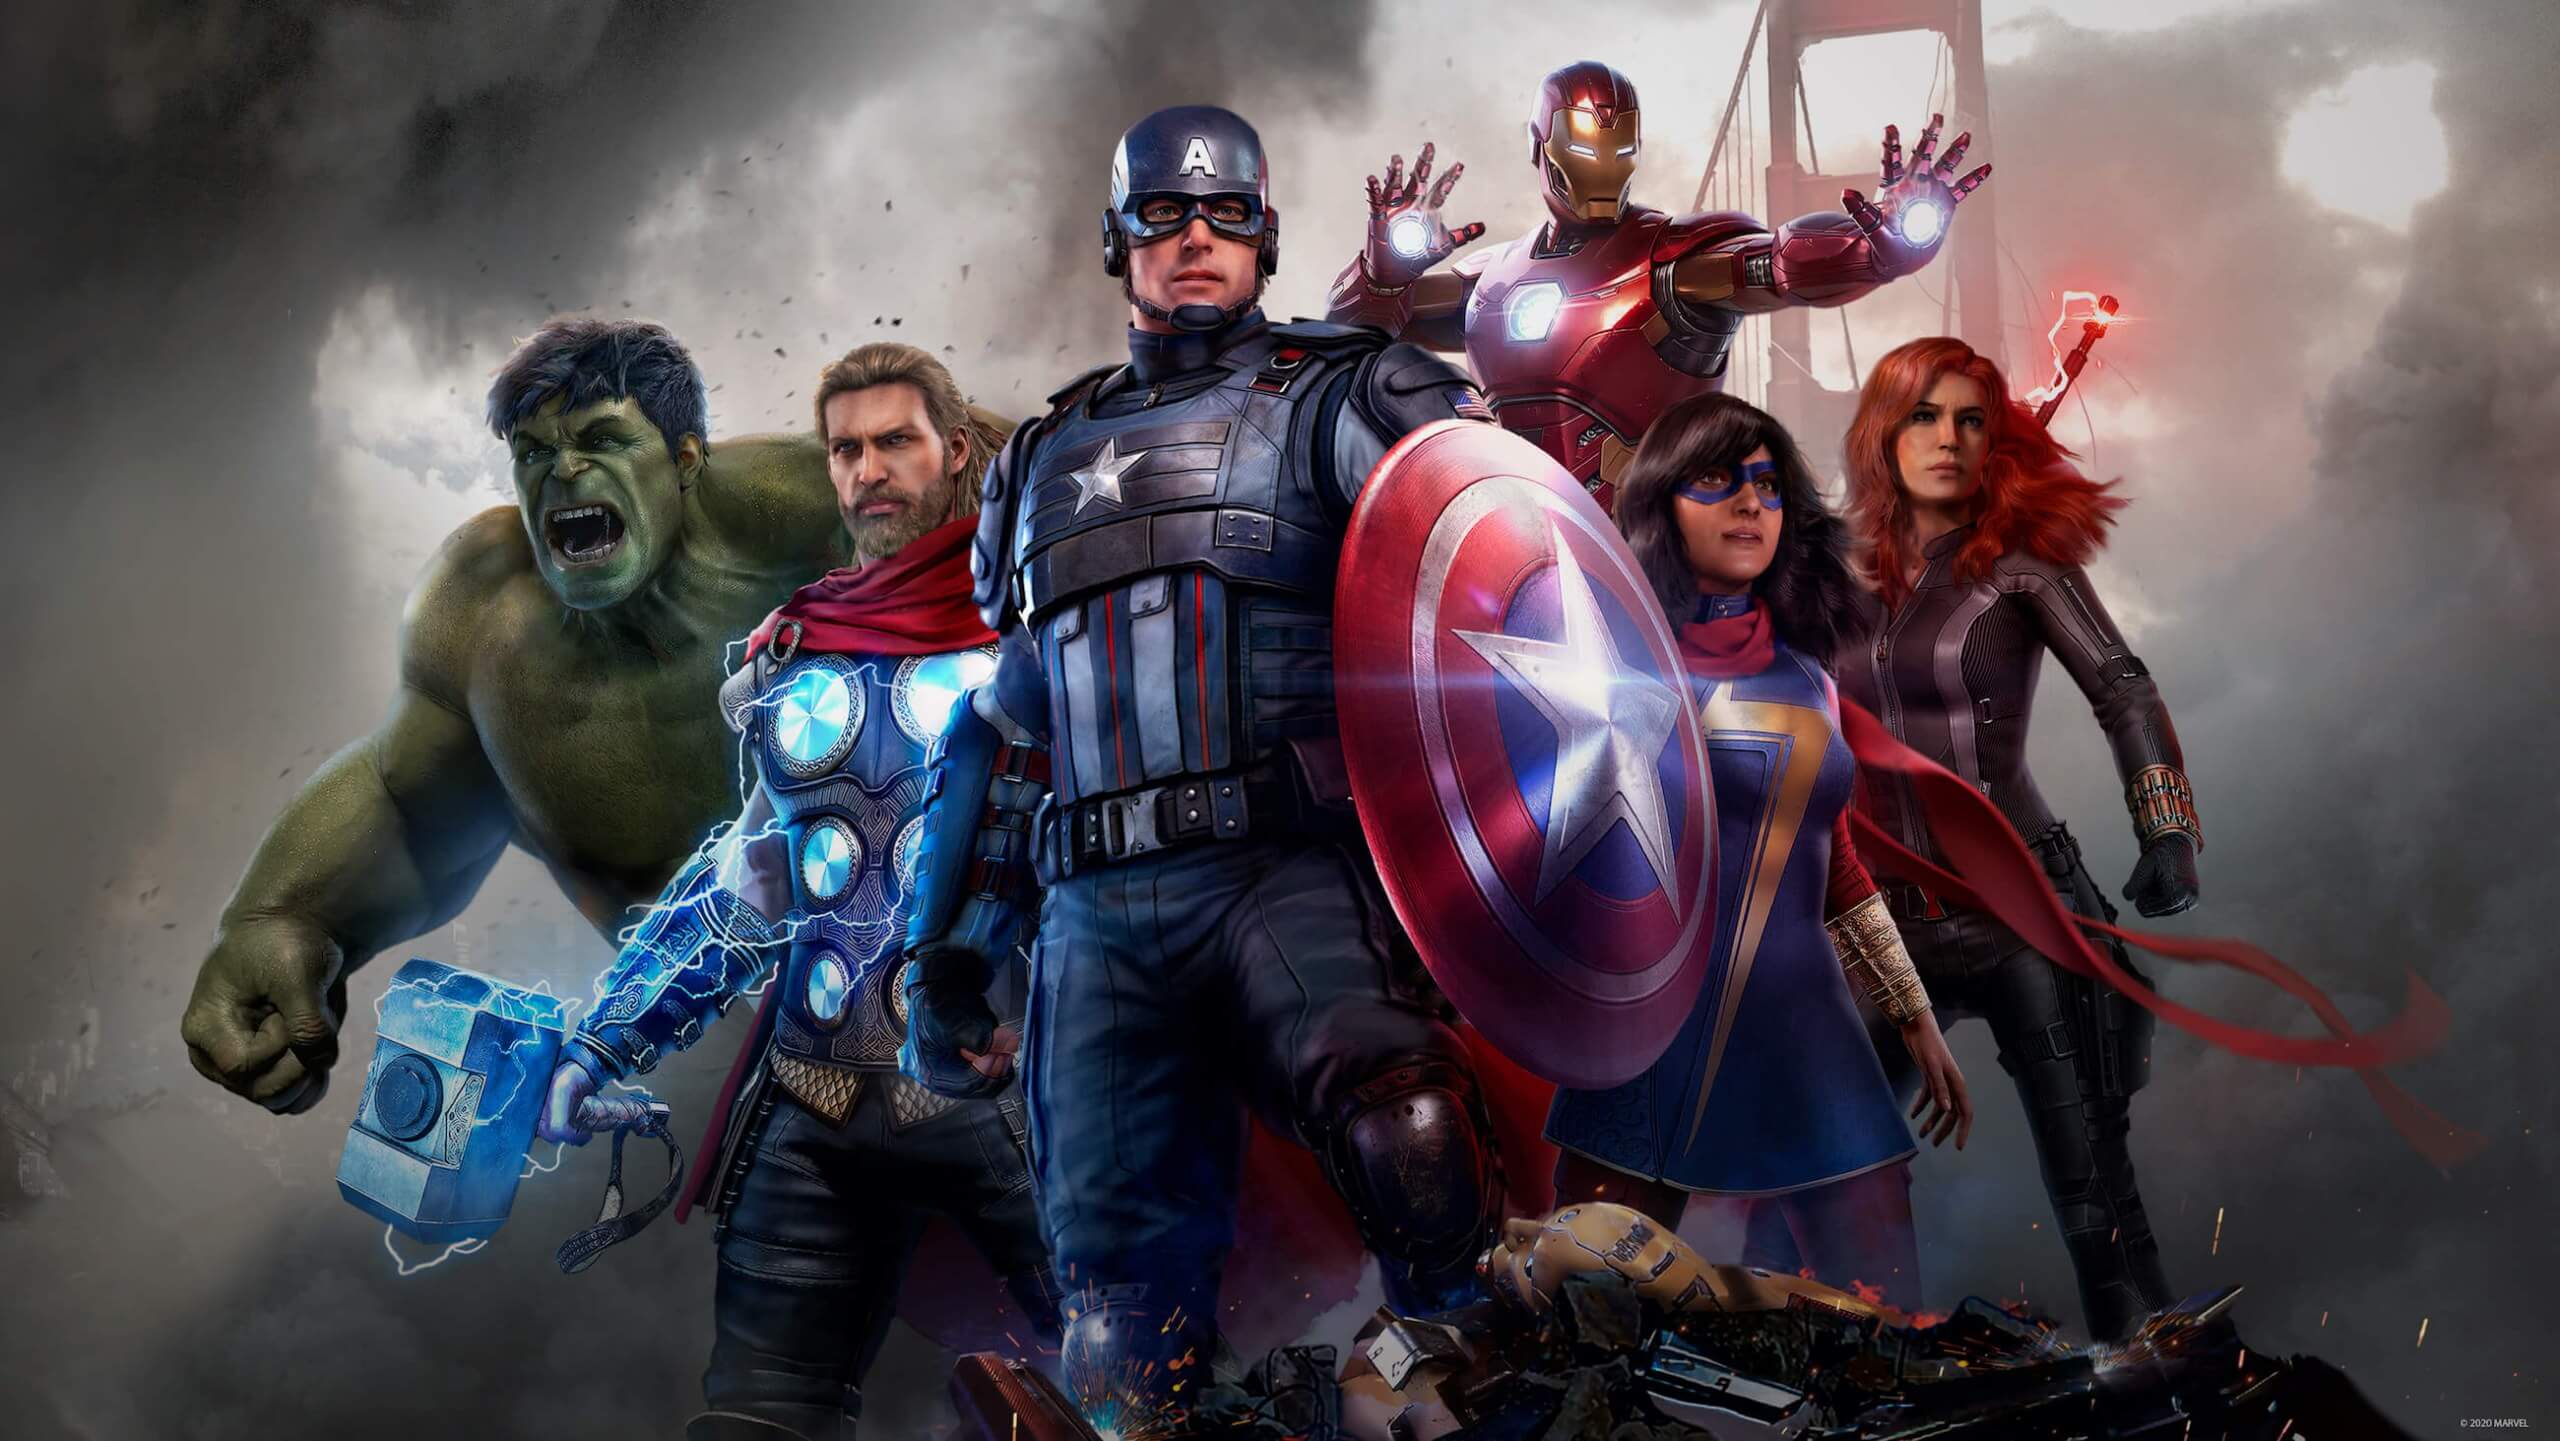 PS4 and Xbox One versions of Marvel's Avengers include next-gen upgrades